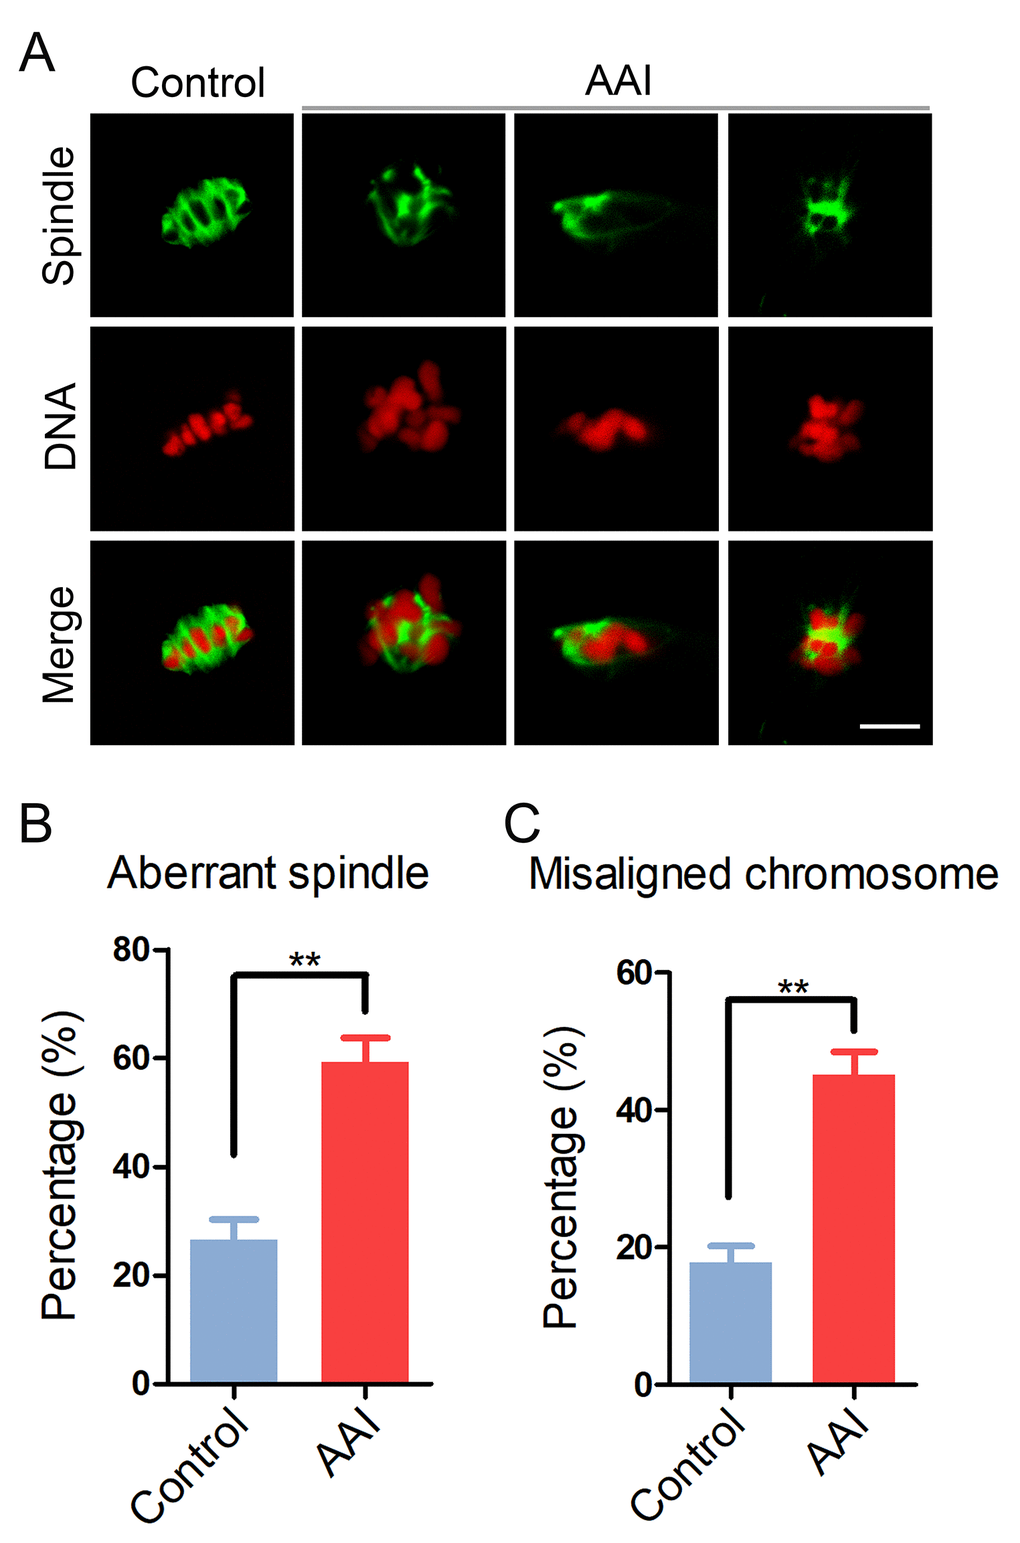 Effects of AAI exposure on the spindle/chromosome structure in porcine oocytes. (A) Representative images of spindle morphologies and chromosome alignment in control and AAI-exposed oocytes. Oocytes were immunostained with anti–α-tubulin-FITC antibody to visualize the spindles and were counterstained with propidium iodide (PI) to visualize the chromosomes. Scale bar, 10 μm. (B) The rate of aberrant spindles was recorded in control and AAI-exposed oocytes. (C) The rate of misaligned chromosomes was recorded in control and AAI-exposed oocytes. Data in (B) and (C) were presented as mean percentage (mean ± SEM) of at least three independent experiments. **P 